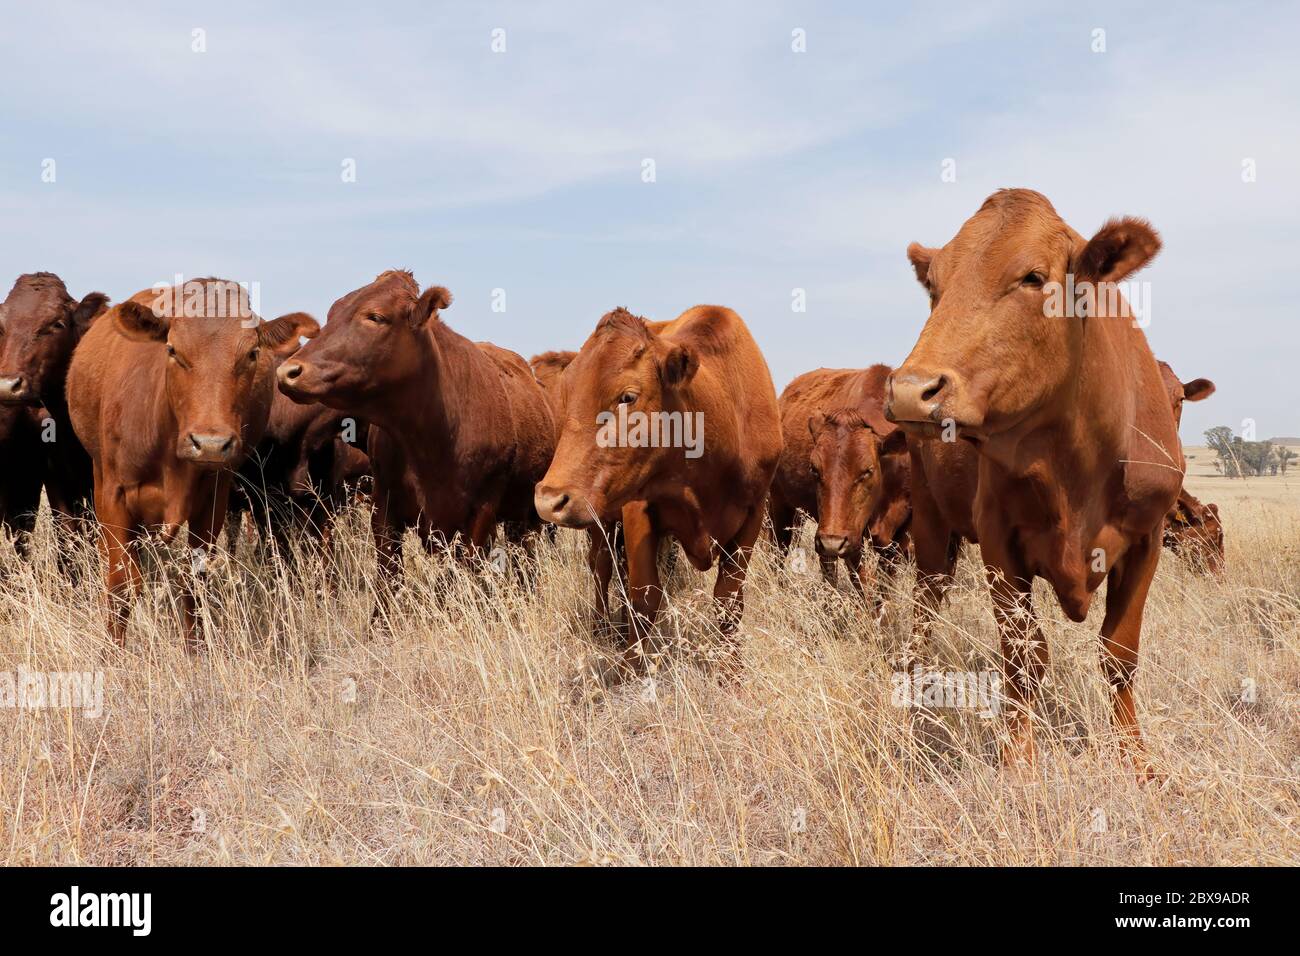 Small herd of free-range cattle on a rural farm, South Africa Stock Photo